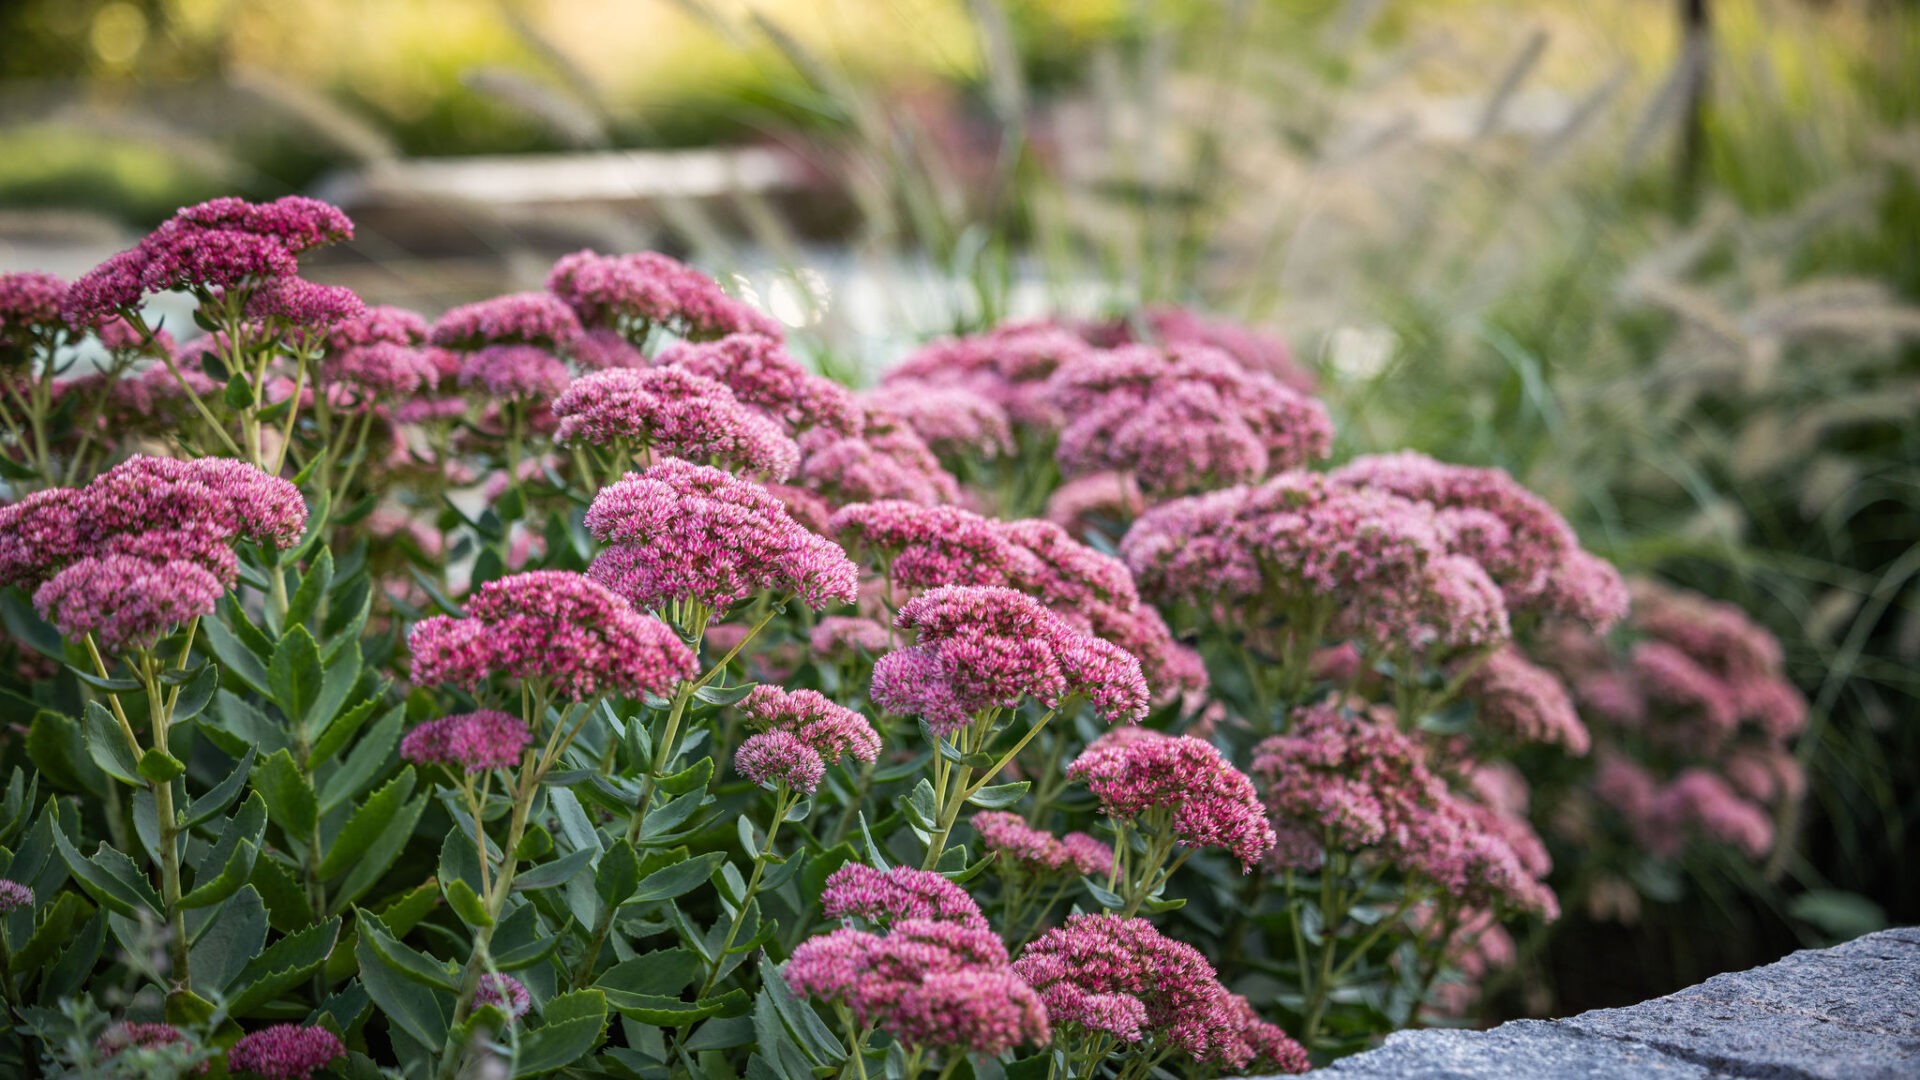 Clusters of pink flowers in focus, with lush greenery against a soft-blurred garden background, create a serene, natural setting with a tranquil atmosphere.